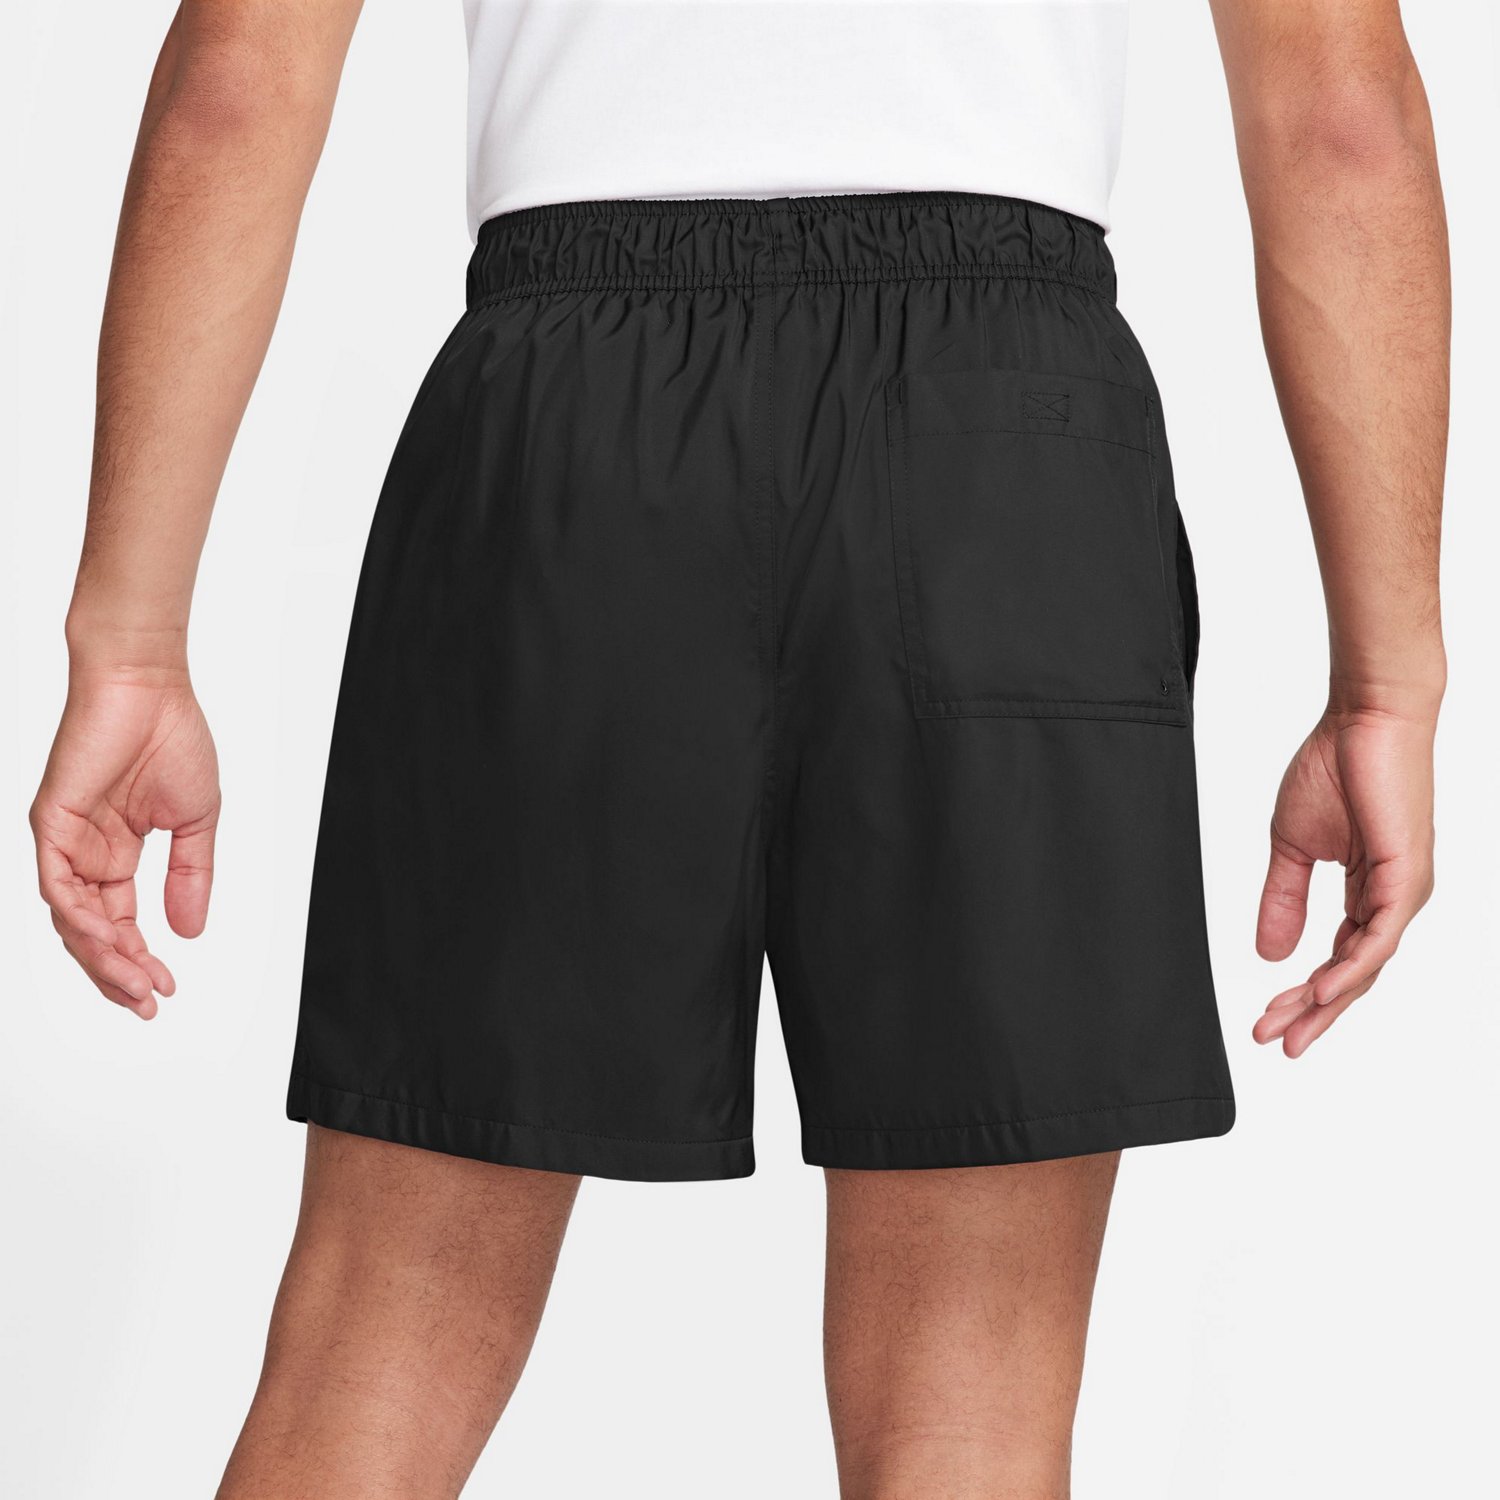 Nike Men's NSW Club Flow Shorts | Free Shipping at Academy